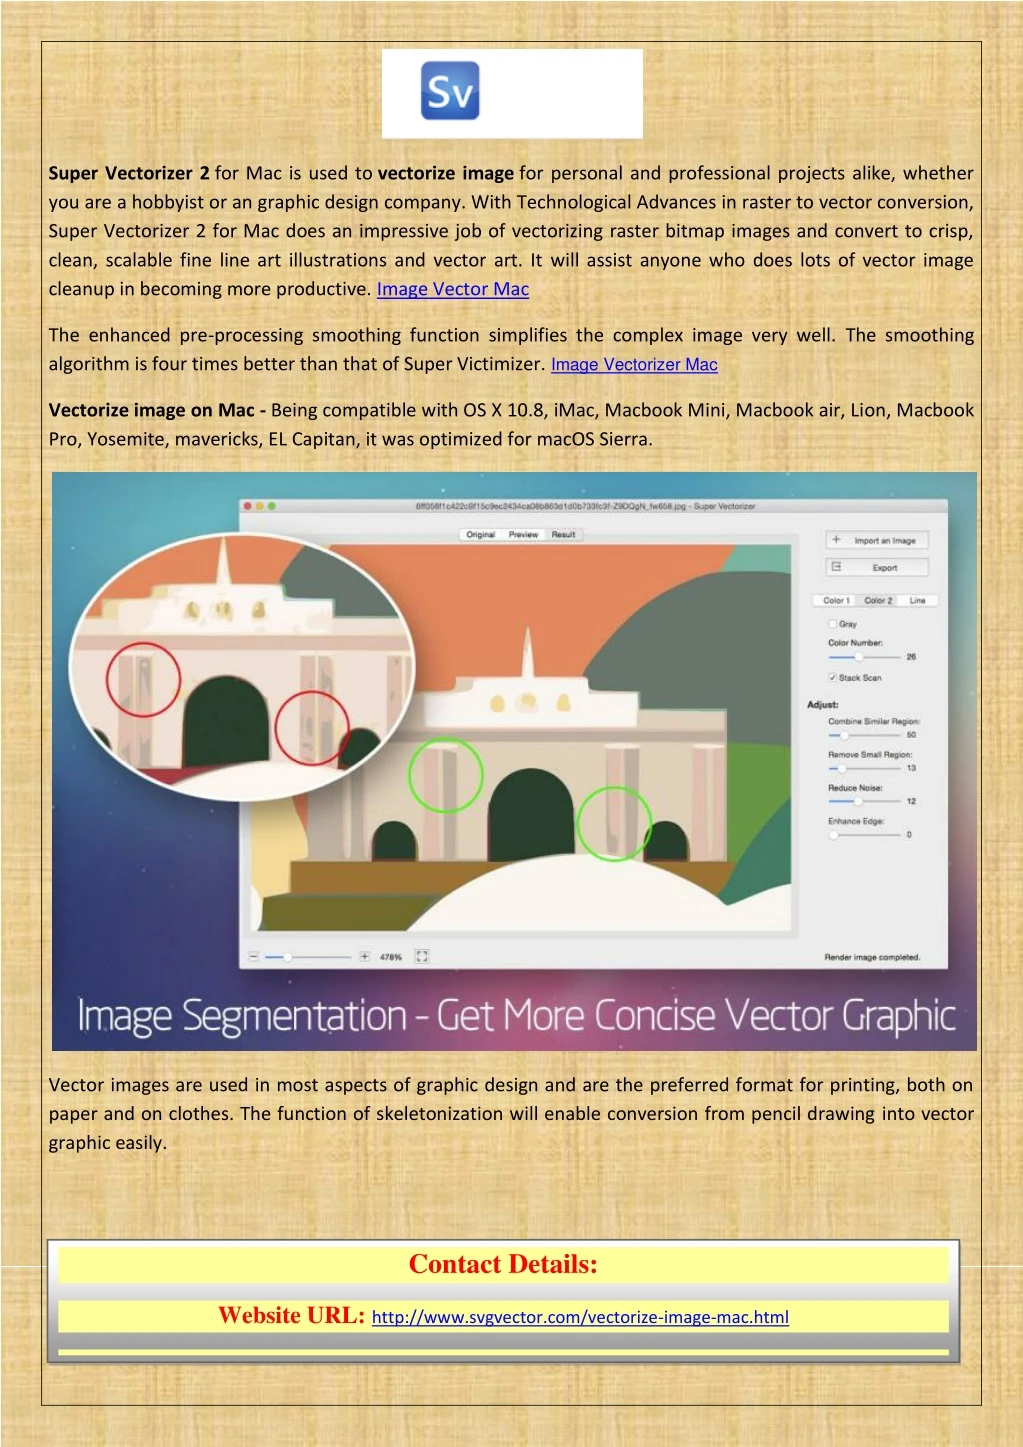 super vectorizer 2 for mac is used to vectorize